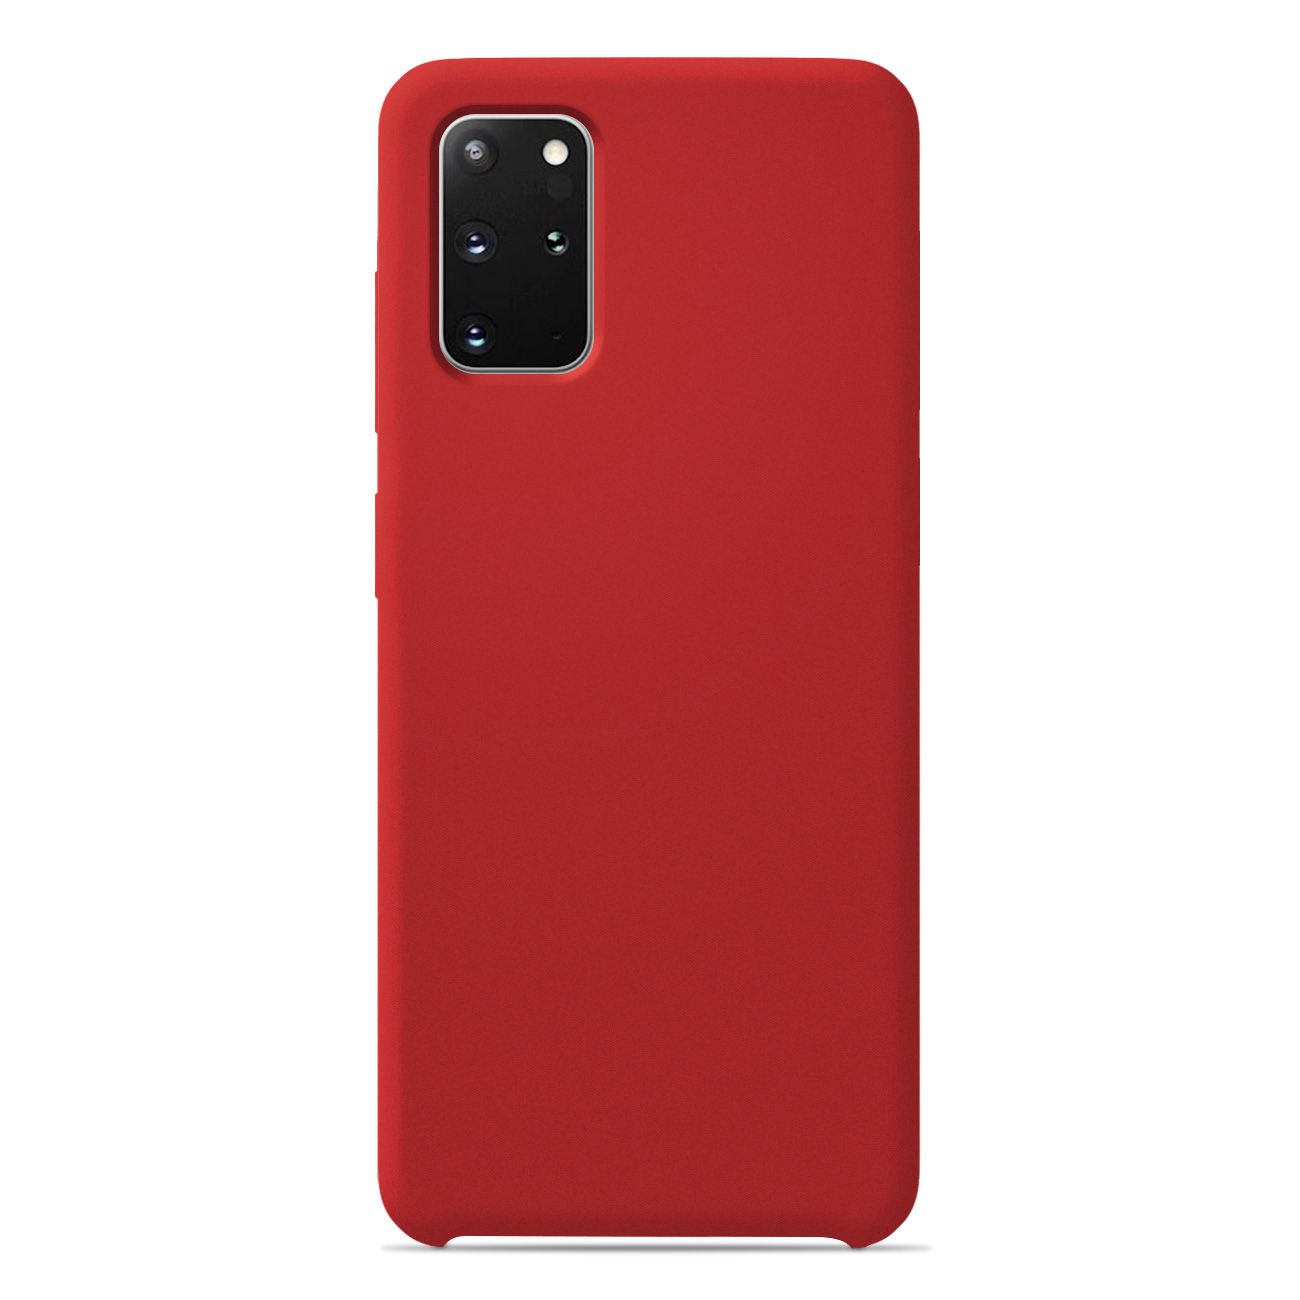 Coque silicone unie Soft Touch Rouge compatible Samsung Galaxy S20